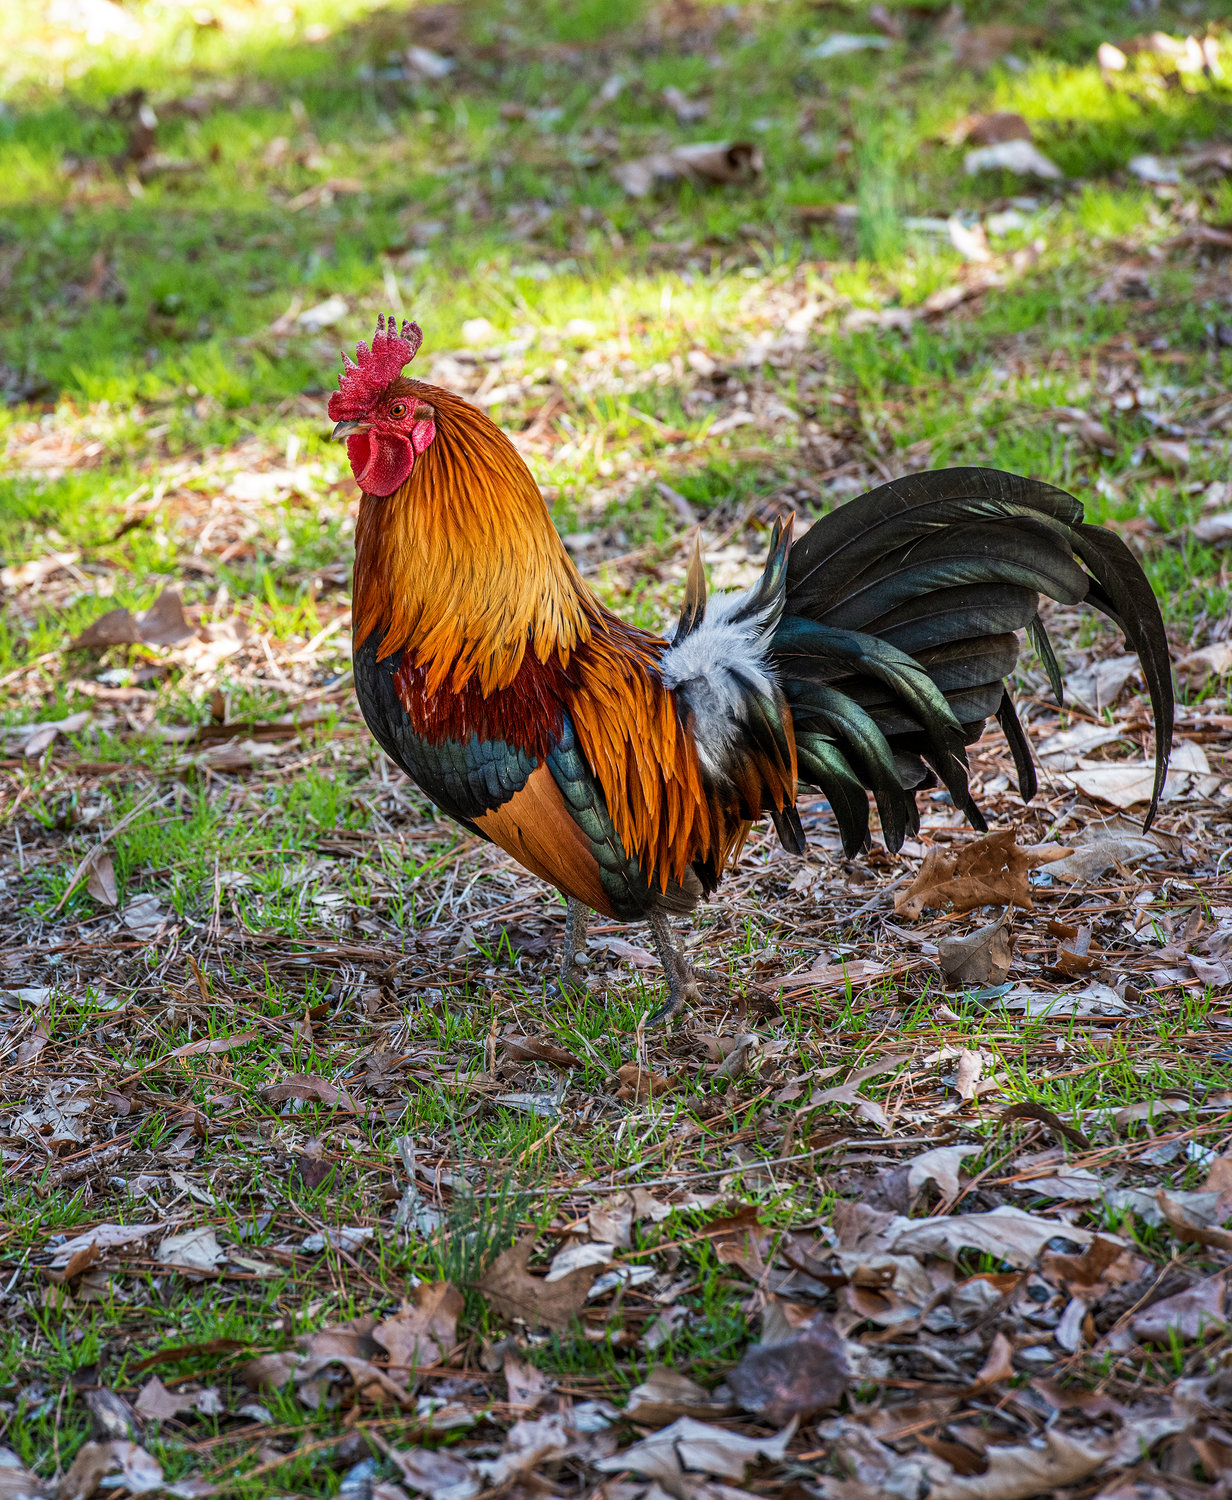 A colorful rooster roams the Hartman farm.